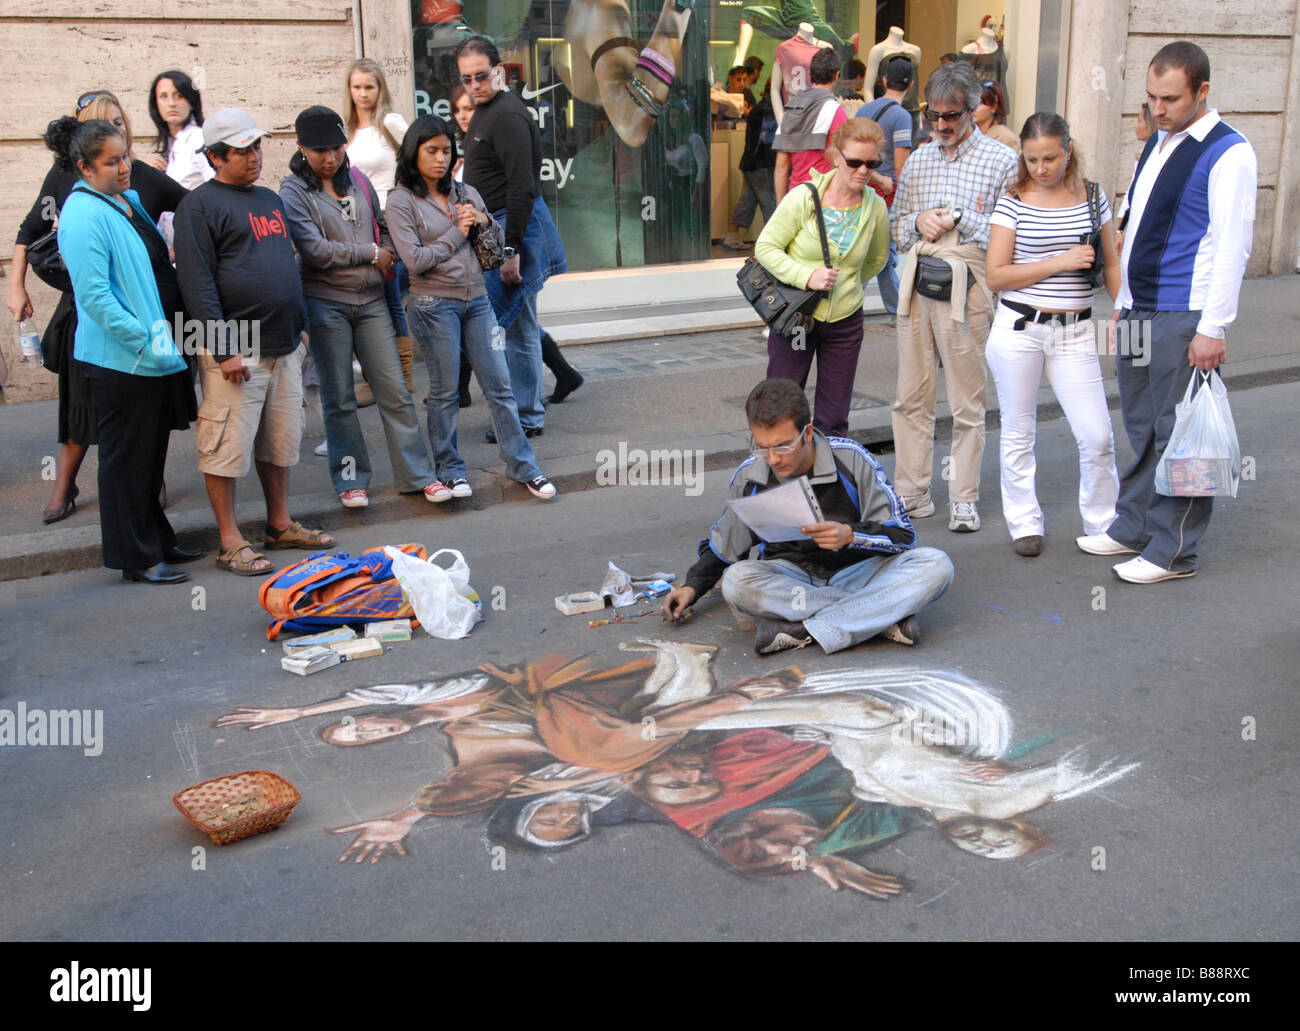 Pavement artist doing a copy of a religious painting in pastel on a street in Rome Italy Stock Photo